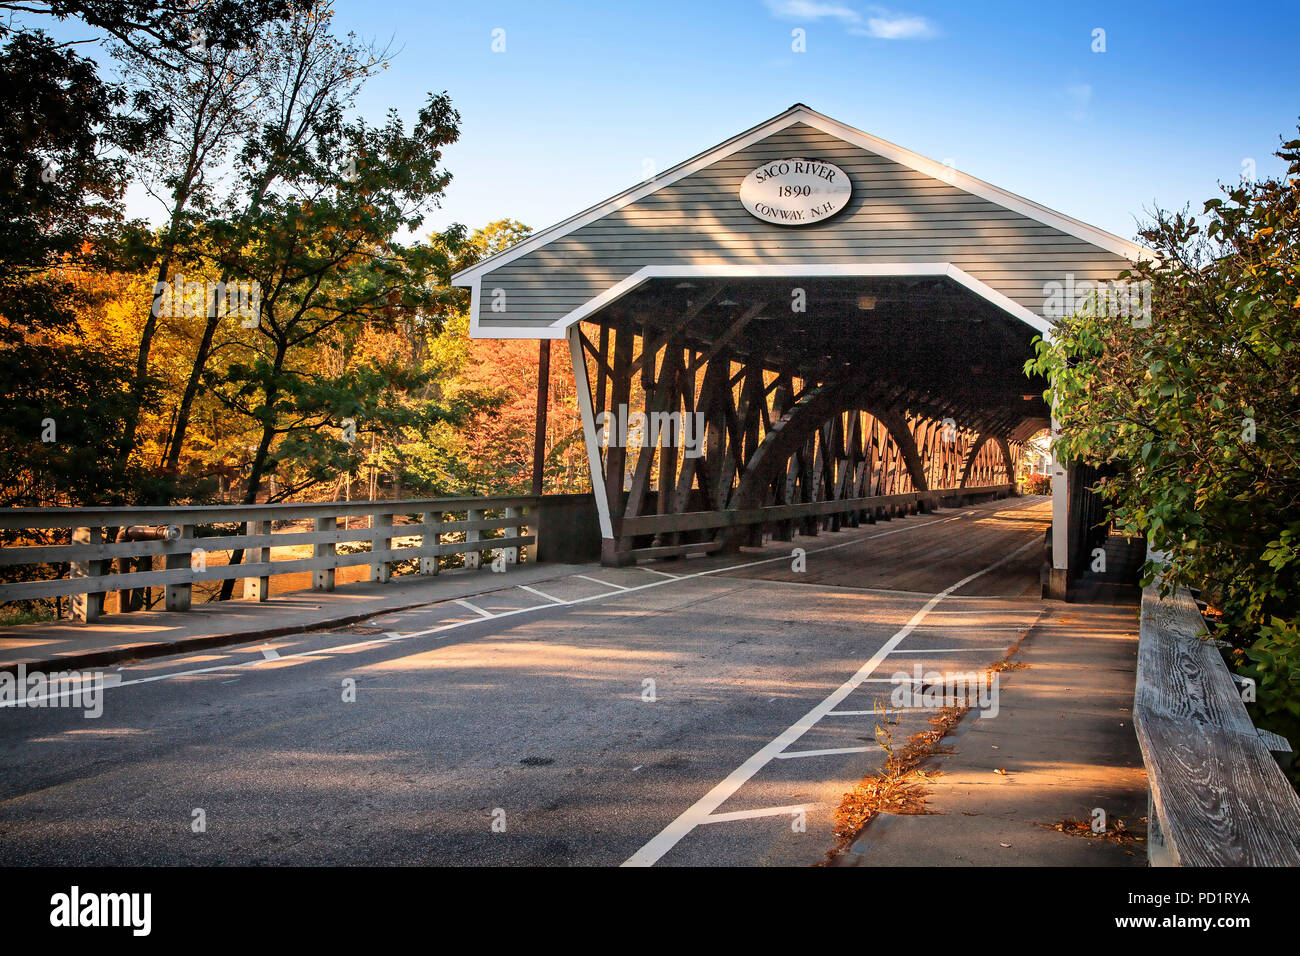 Die Saco River Covered Bridge (1890) in North Conway, New Hampshire. Stockfoto